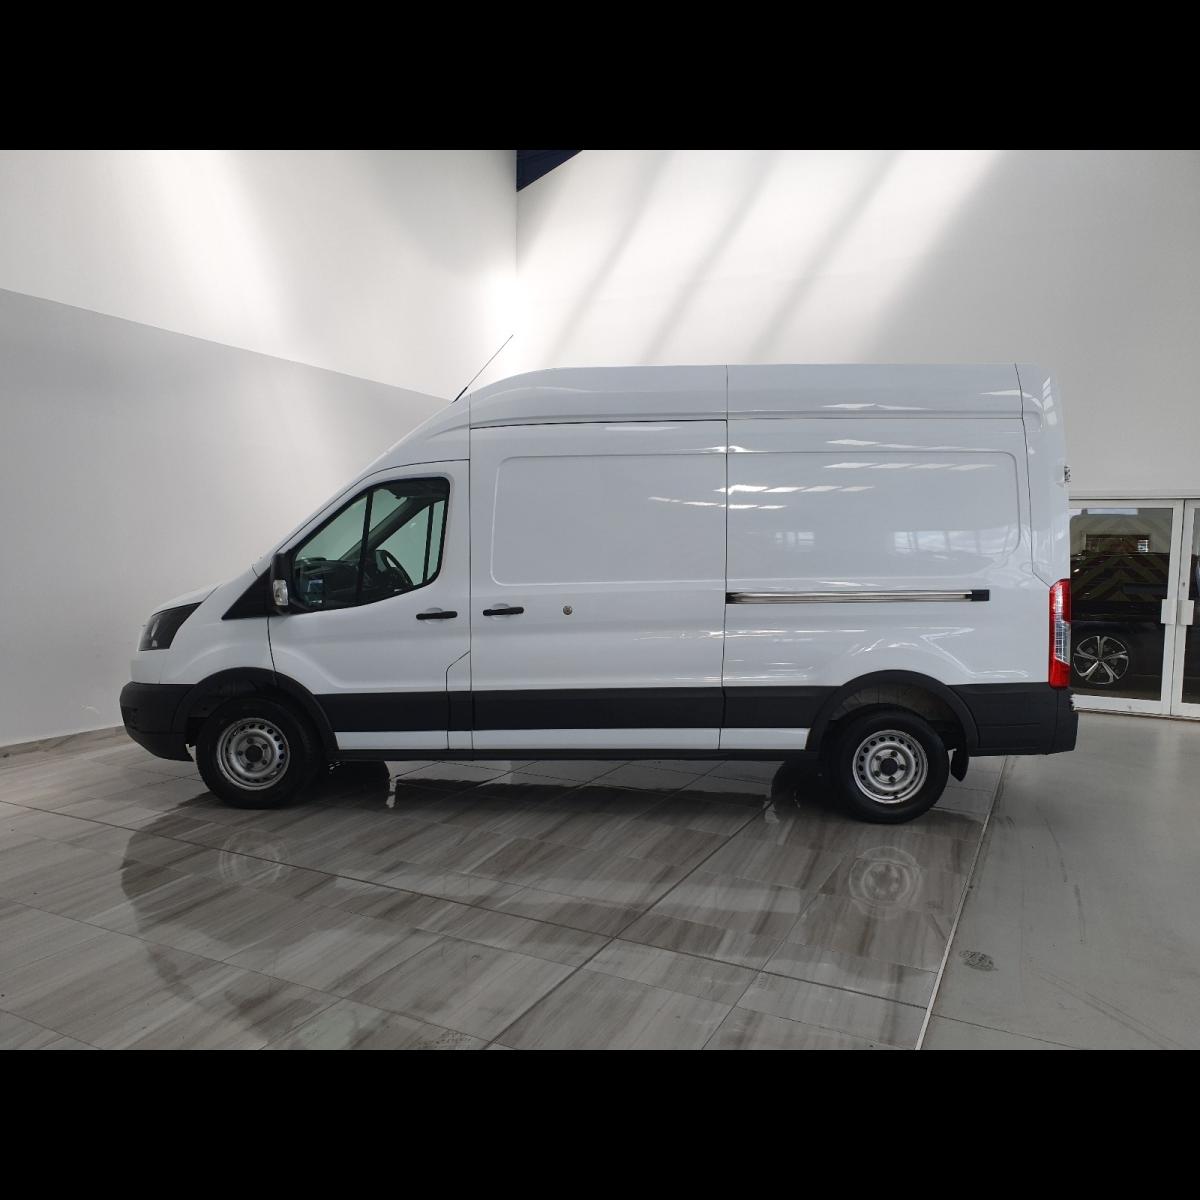 Car of the Week: 171 Ford Transit 350 LWB HIGH ROOF 2.0 TDCI 130BHP - Your Perfect Business Companio